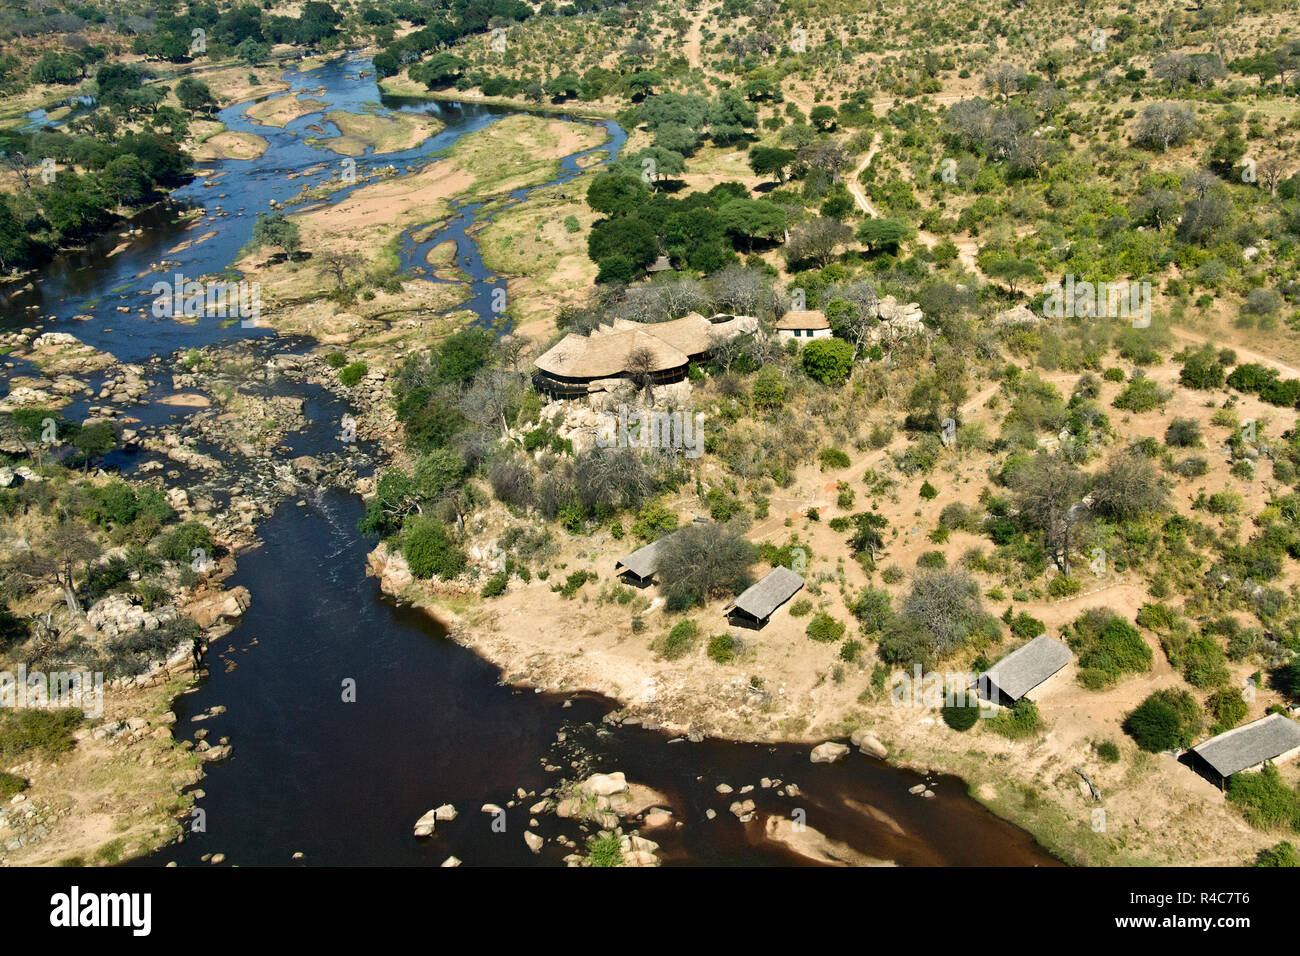 The aerial view of the main public area of Ruaha River Camp, overlooking the rapids on the Great Ruaha River Stock Photo